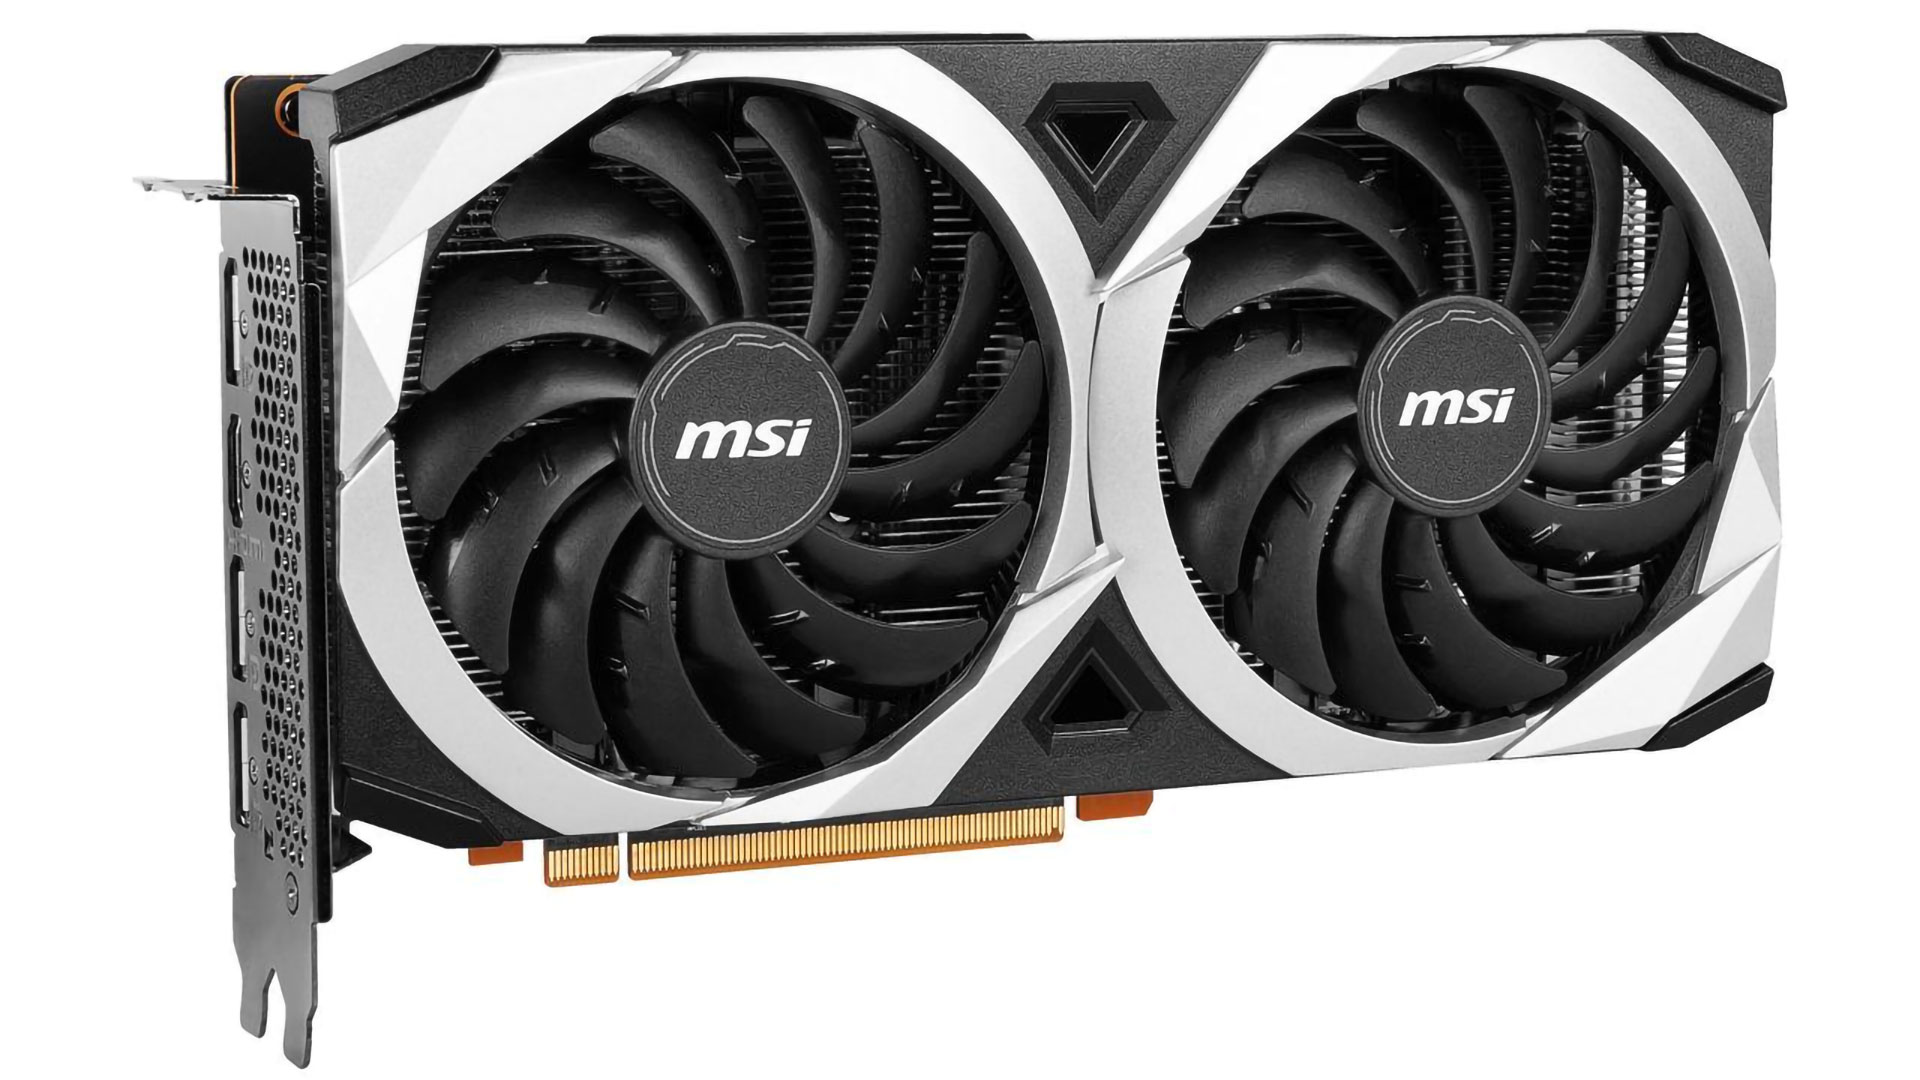 MSI RX 6650 XT for $249 Represents the Best Current GPU Value